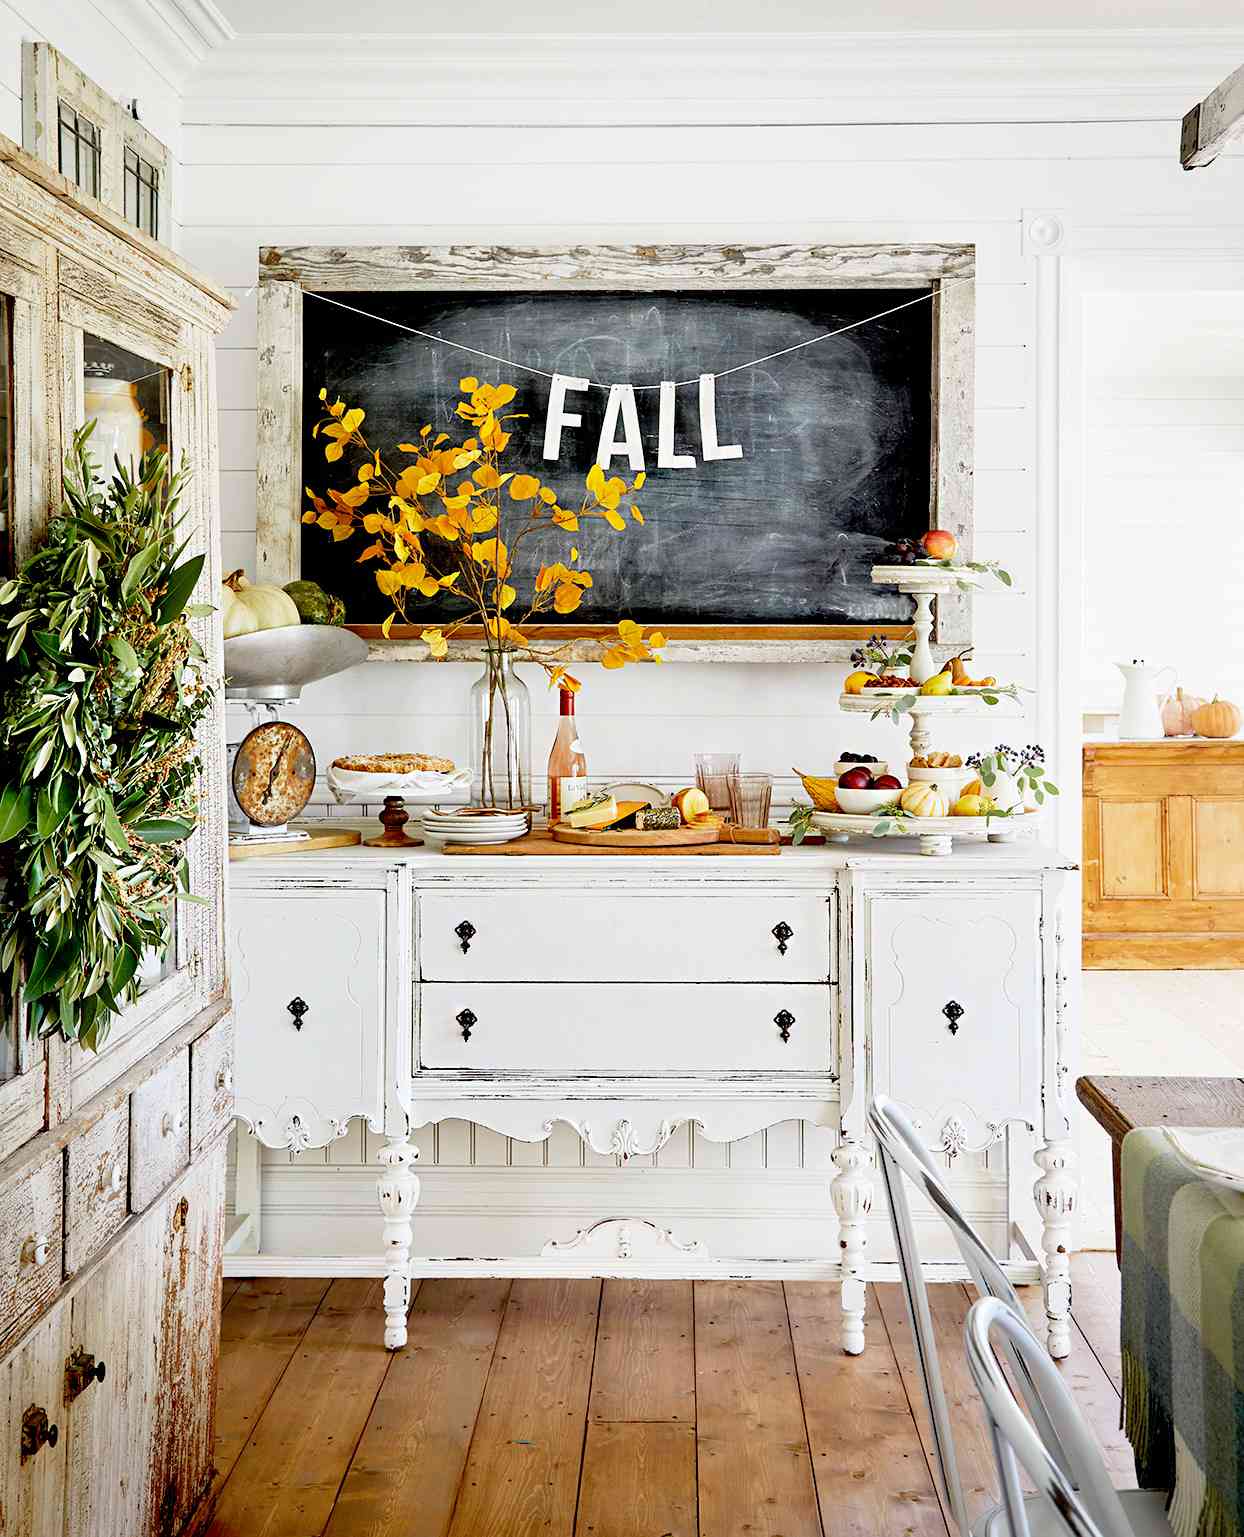 Add Seasonal Style to Your Home With These 30+ Fall Decorating Ideas |  Better Homes & Gardens